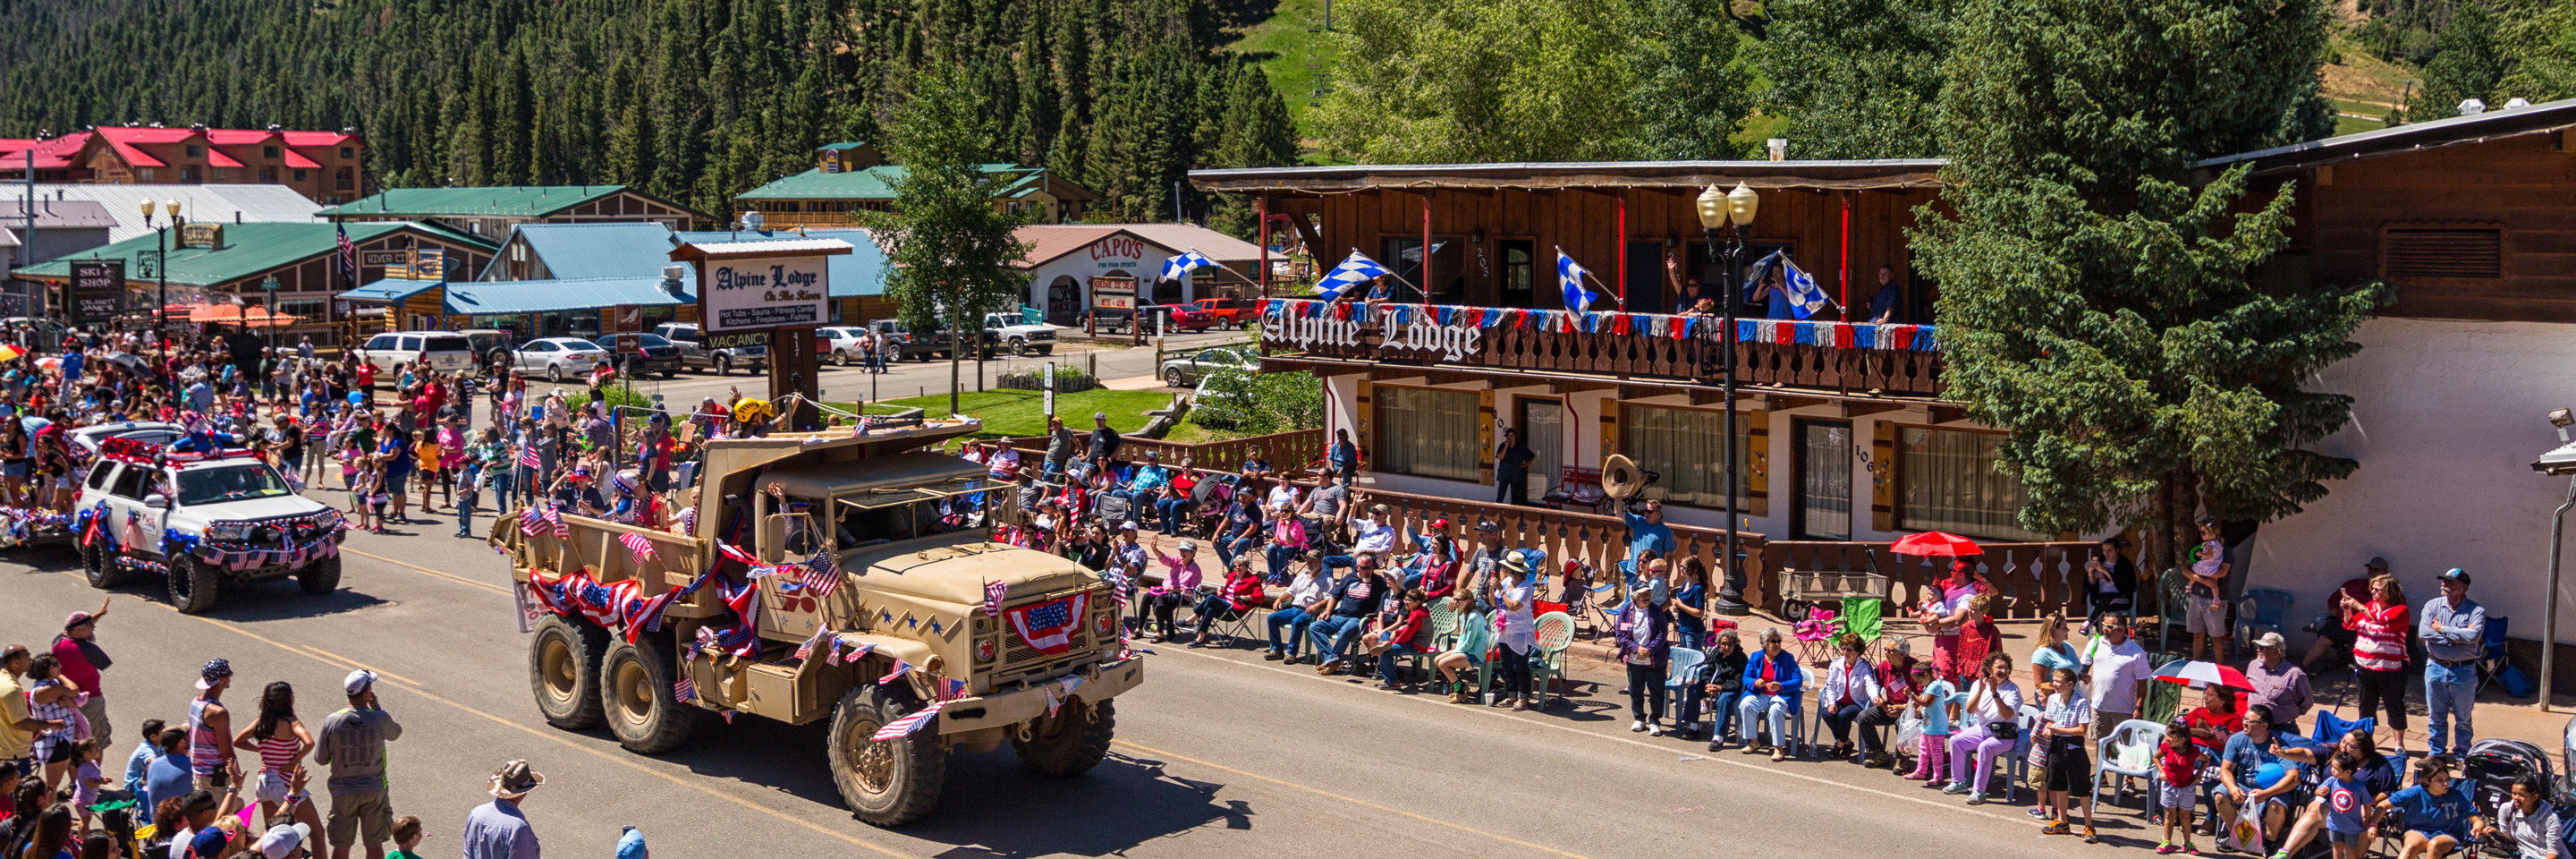 4th of july parade in red river